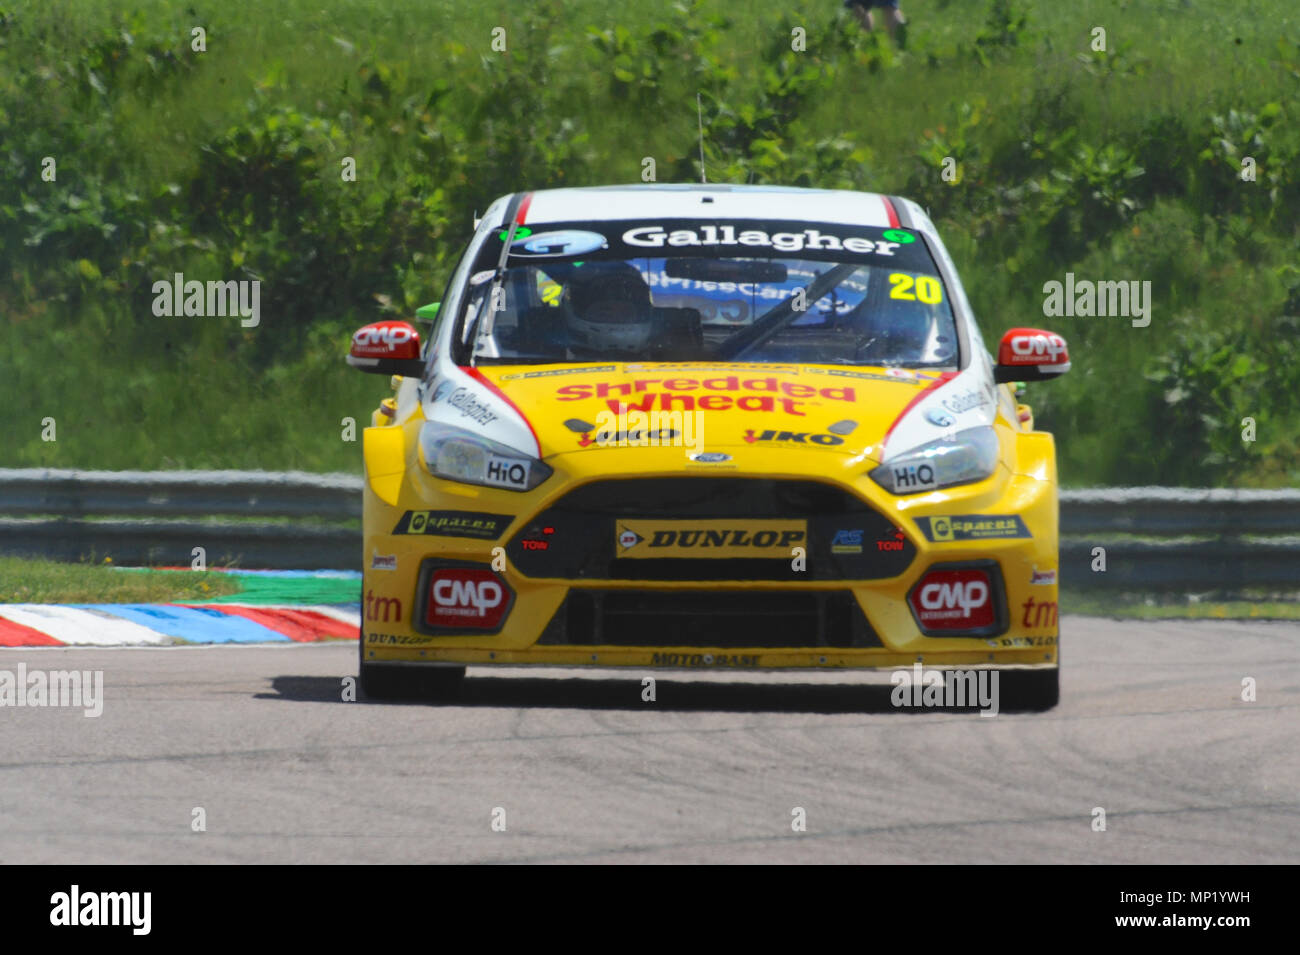 Andover, Hampshire, UK. 20th May, 2018. James Cole (Team Shredded Wheat Racing/Gallagher) racing at Thruxton Race Circuit during the Dunlop MSA British Touring Car Championship at Thruxton Race Circuit, Andover, Hampshire, United Kingdom. With the highest average speed of any track visited by the BTCC, Thruxton's 2.4 mile circuit provides some of the biggest thrills and spills in motor sport and has earned a reputation of being a true driver's track. Credit: Michael Preston/Alamy Live News Stock Photo